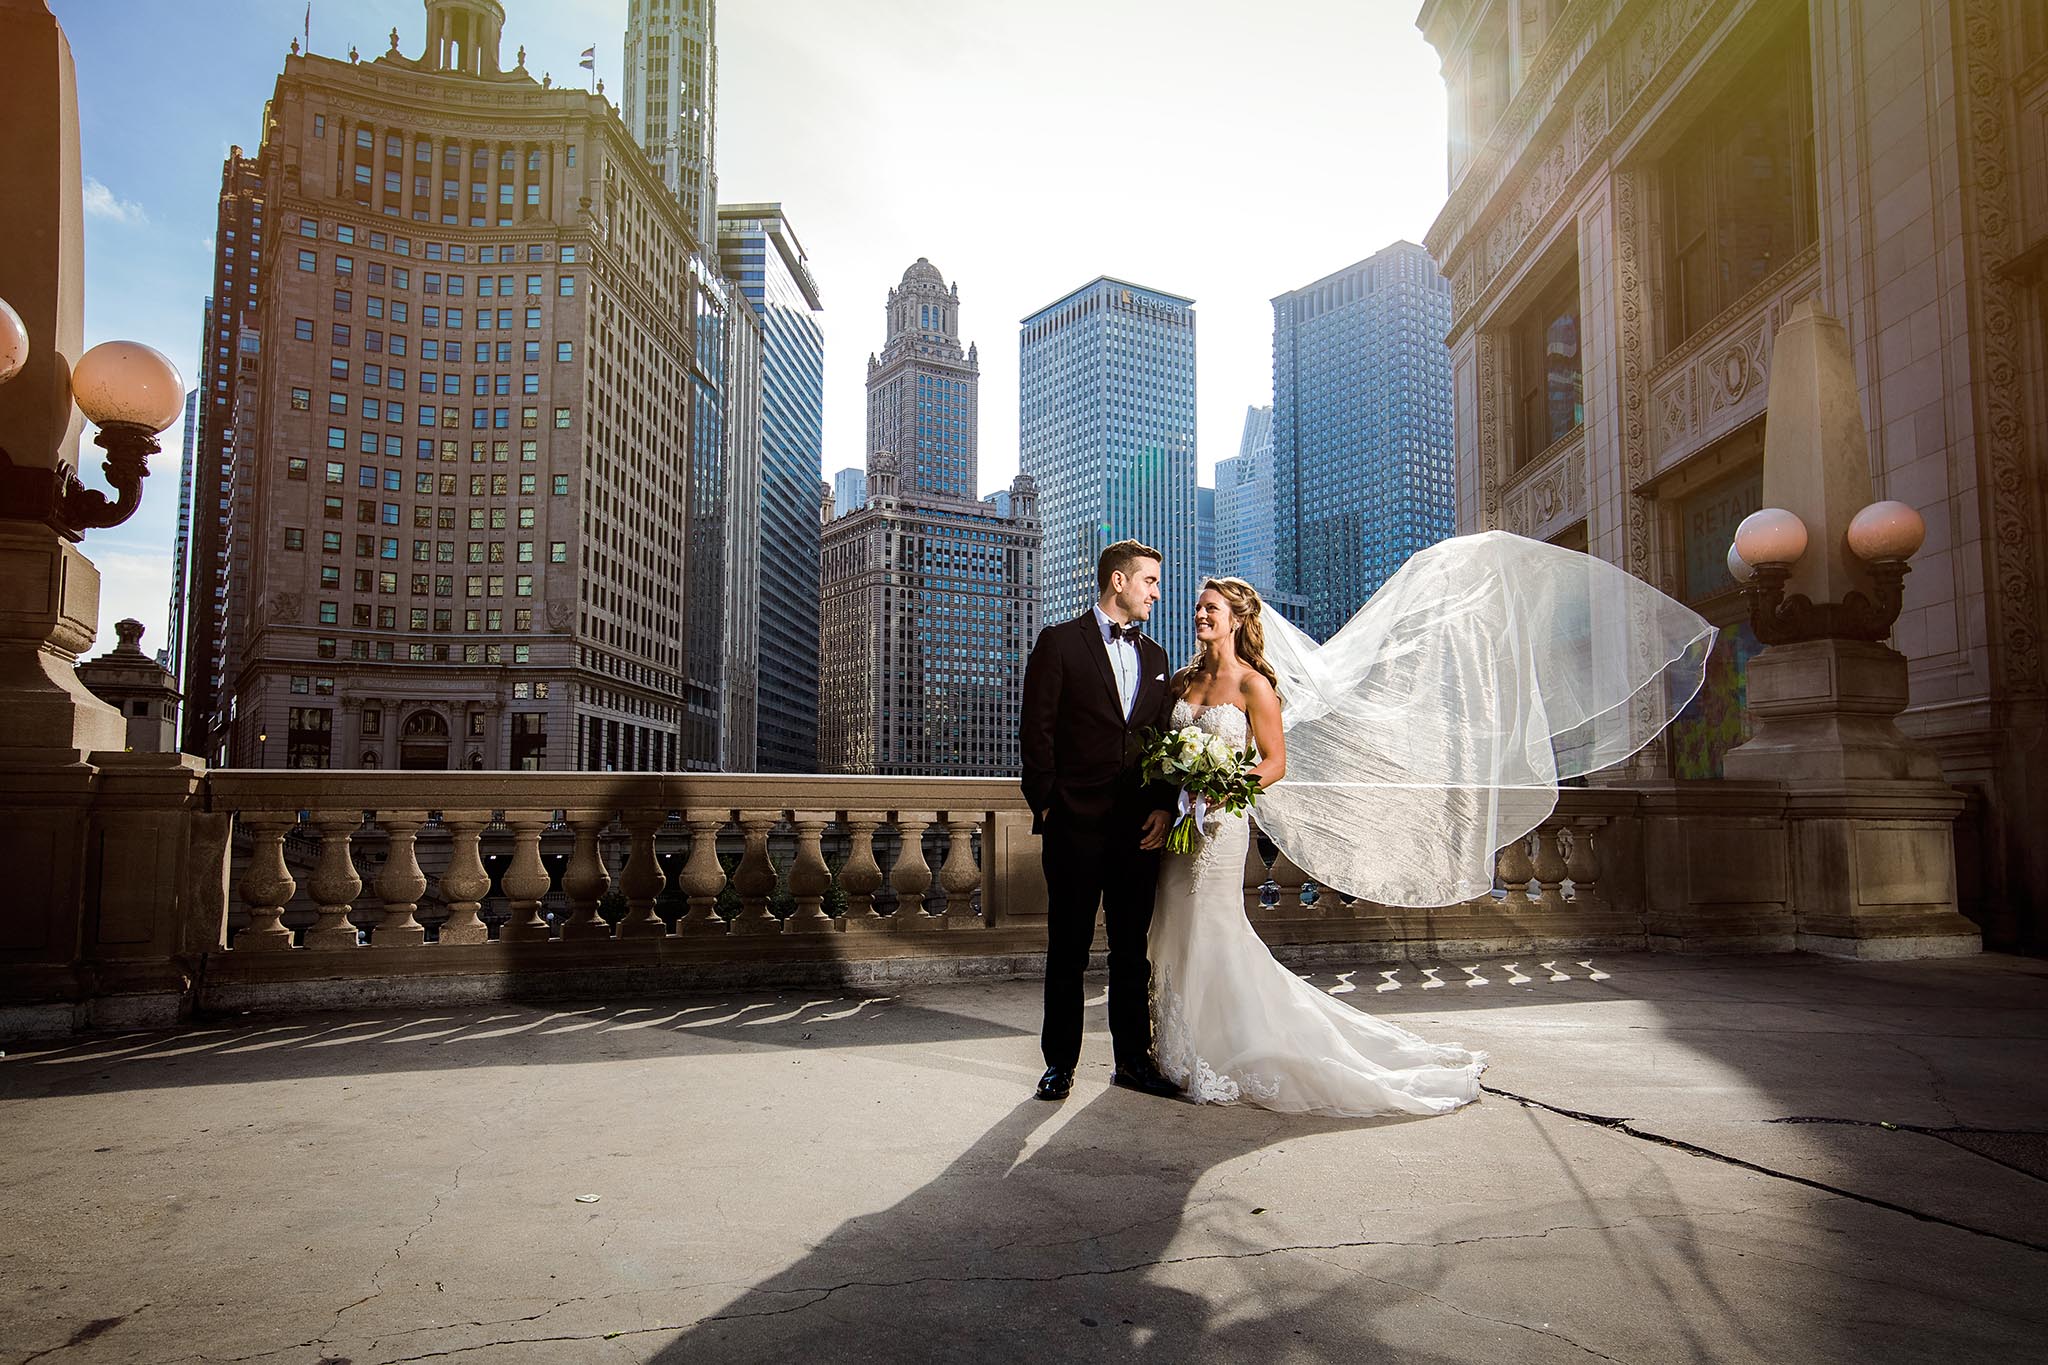 Lakeview wedding photographer - Chicago